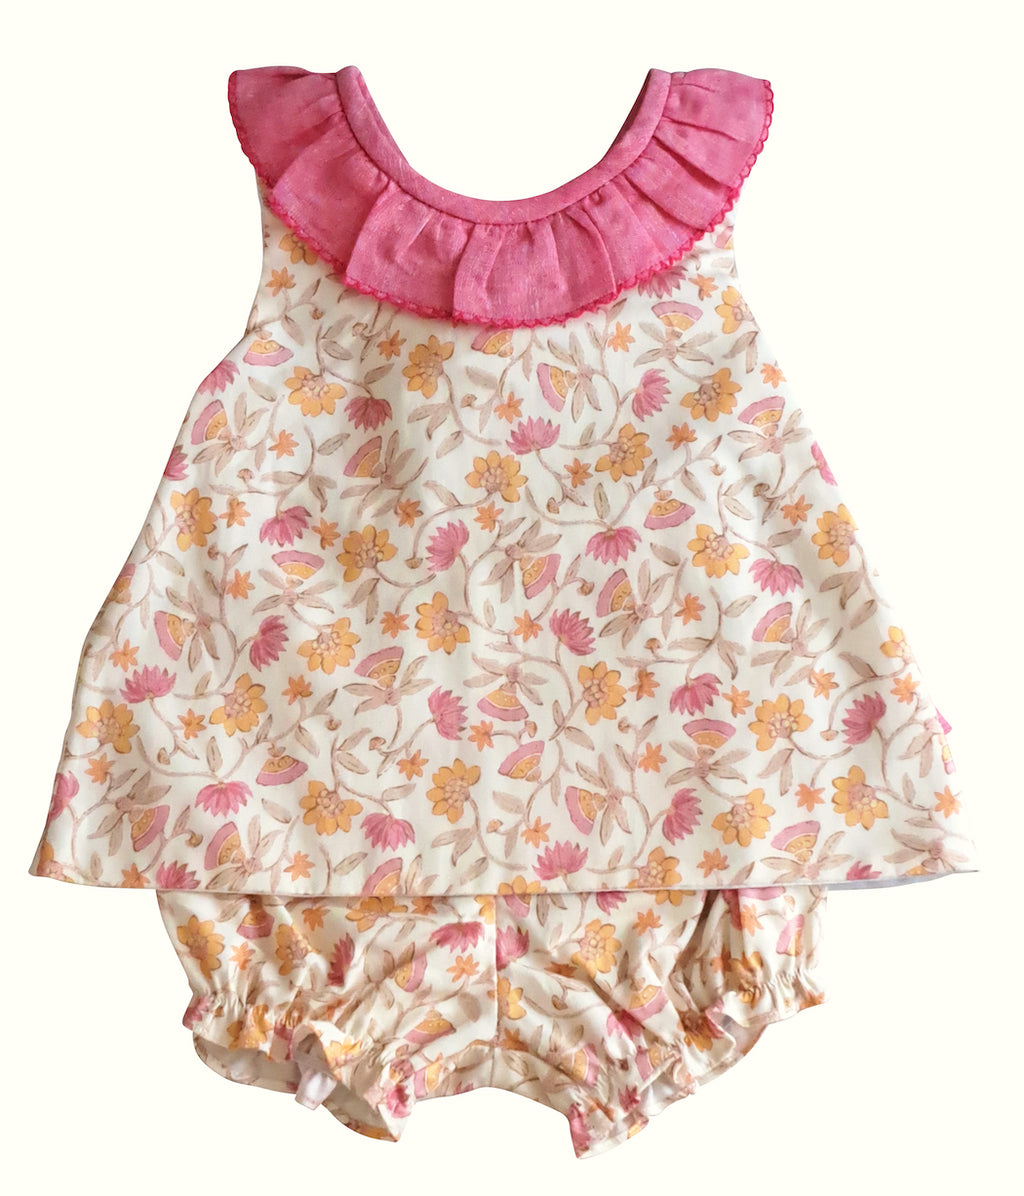 Tessa Collection Floral baby girl diaper Set - Little Threads Inc. Children's Clothing